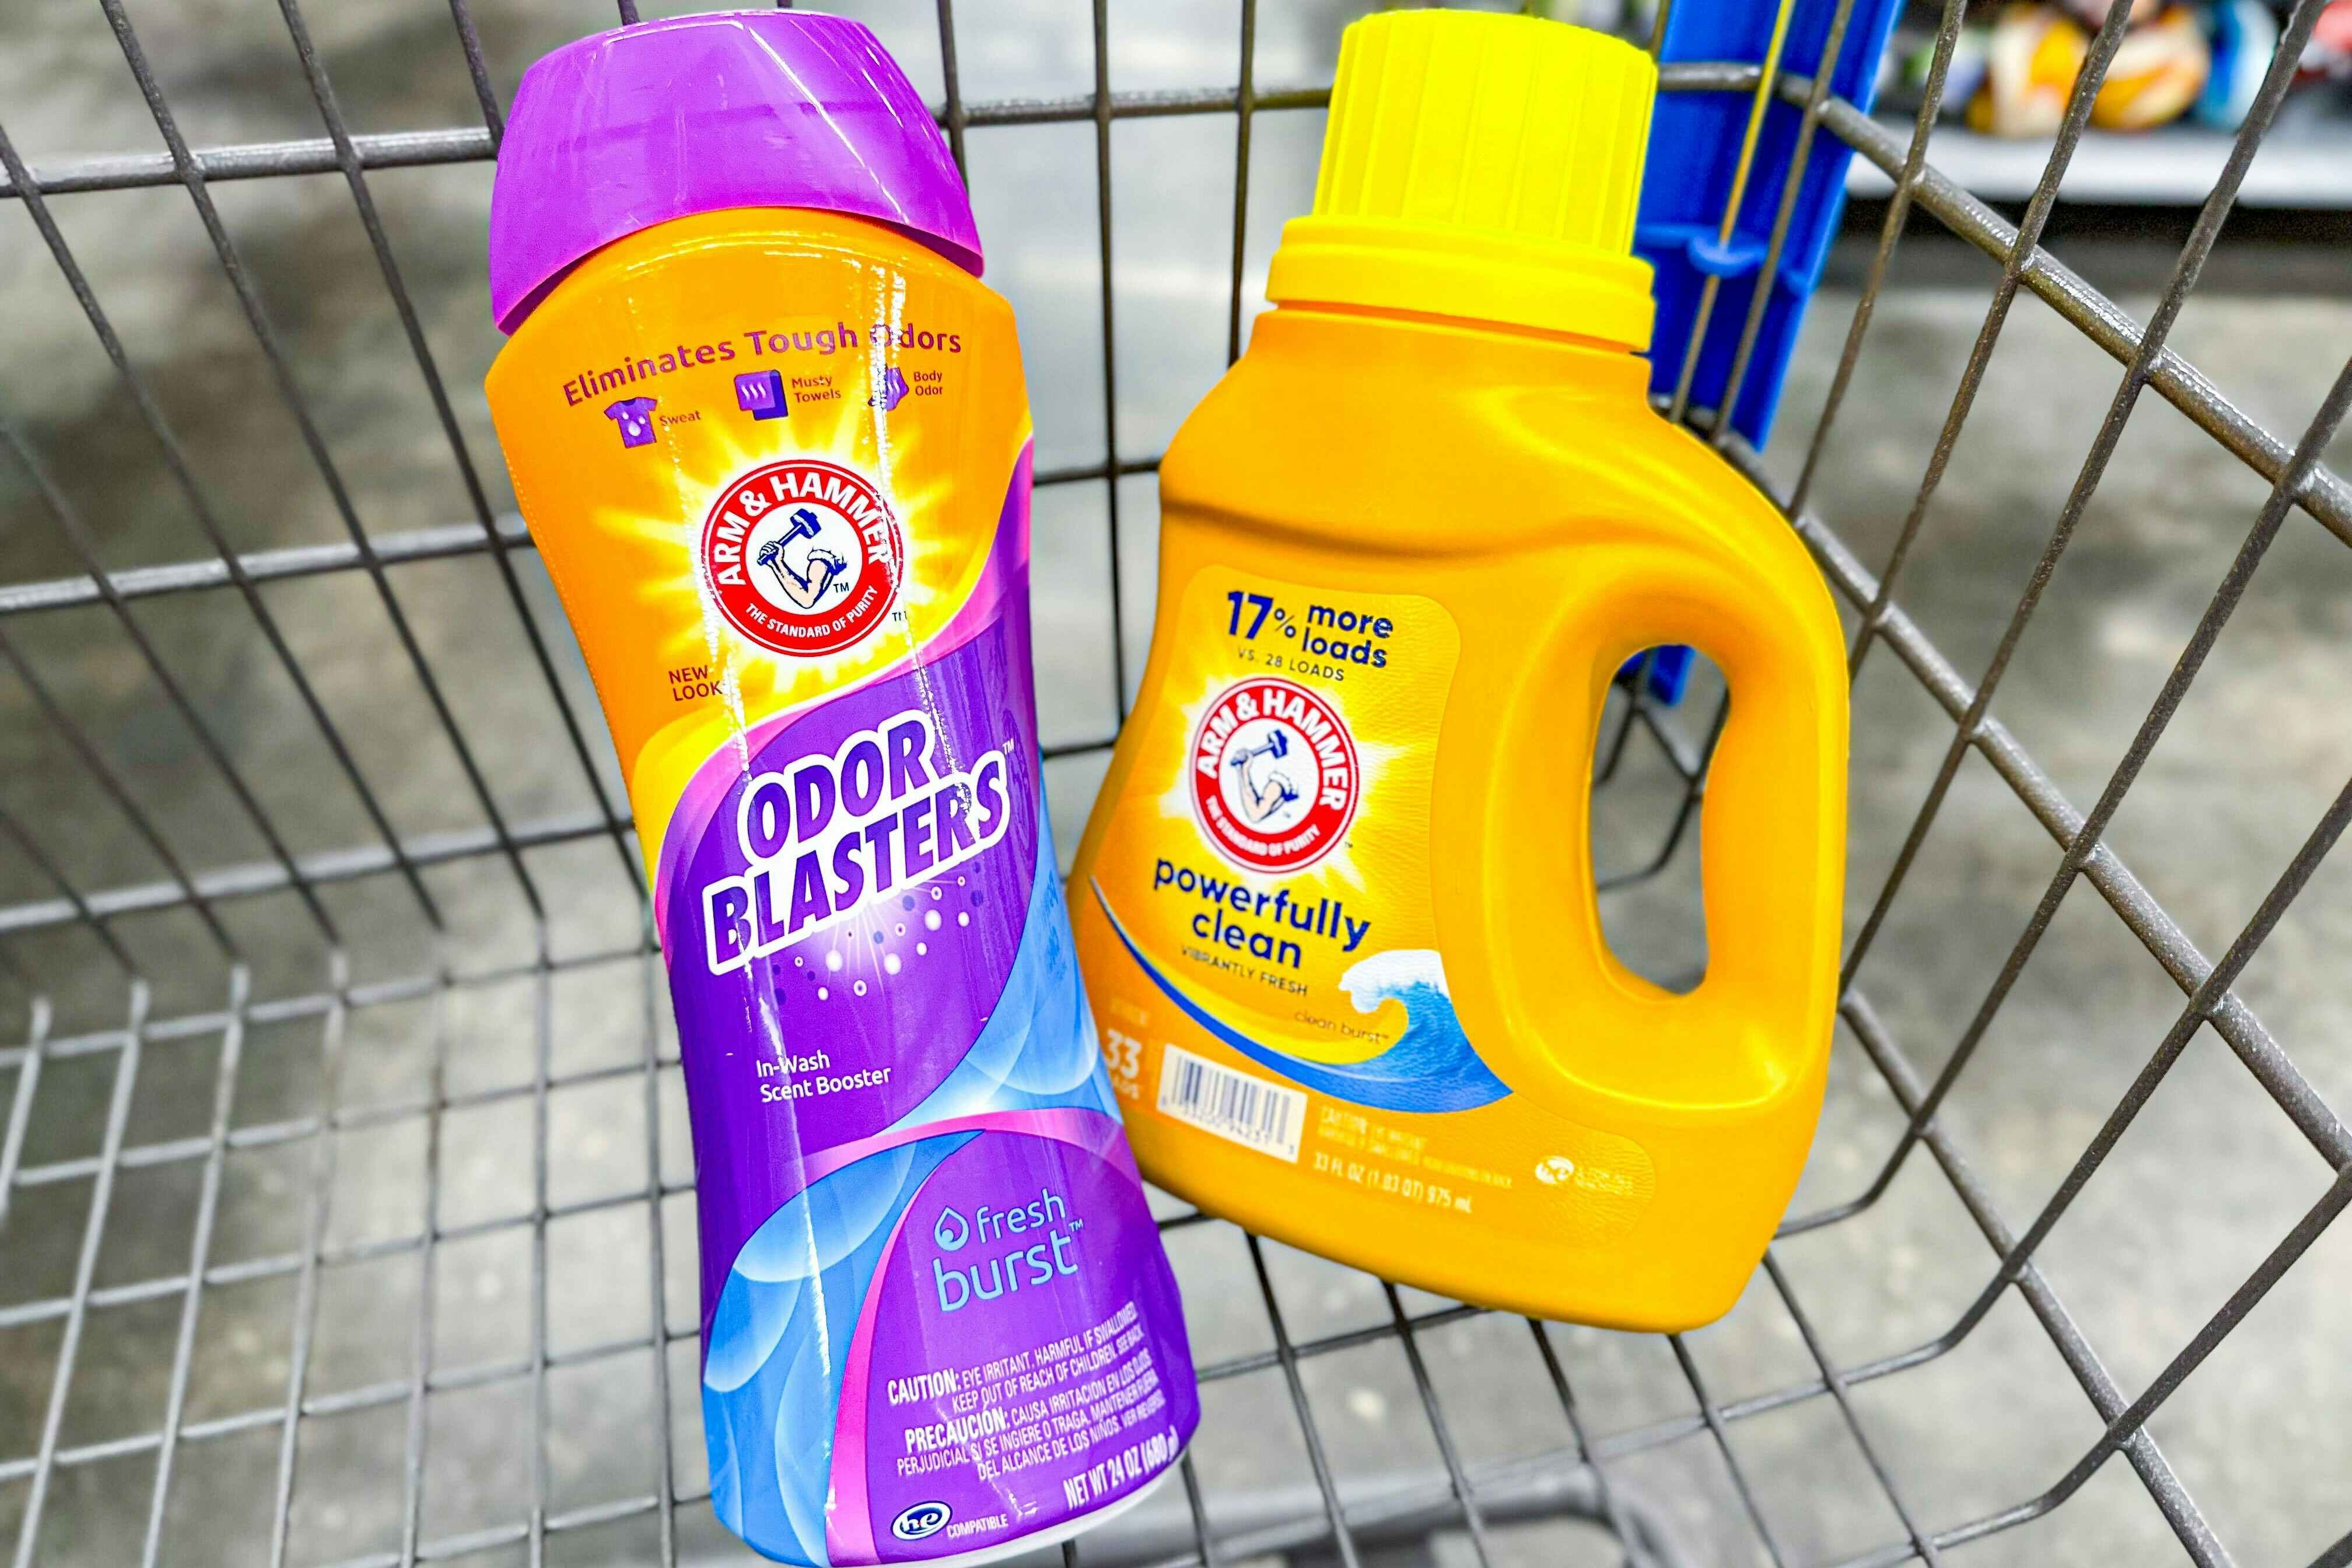 Score Big Savings on Arm & Hammer Laundry Items at Your Favorite Retailers